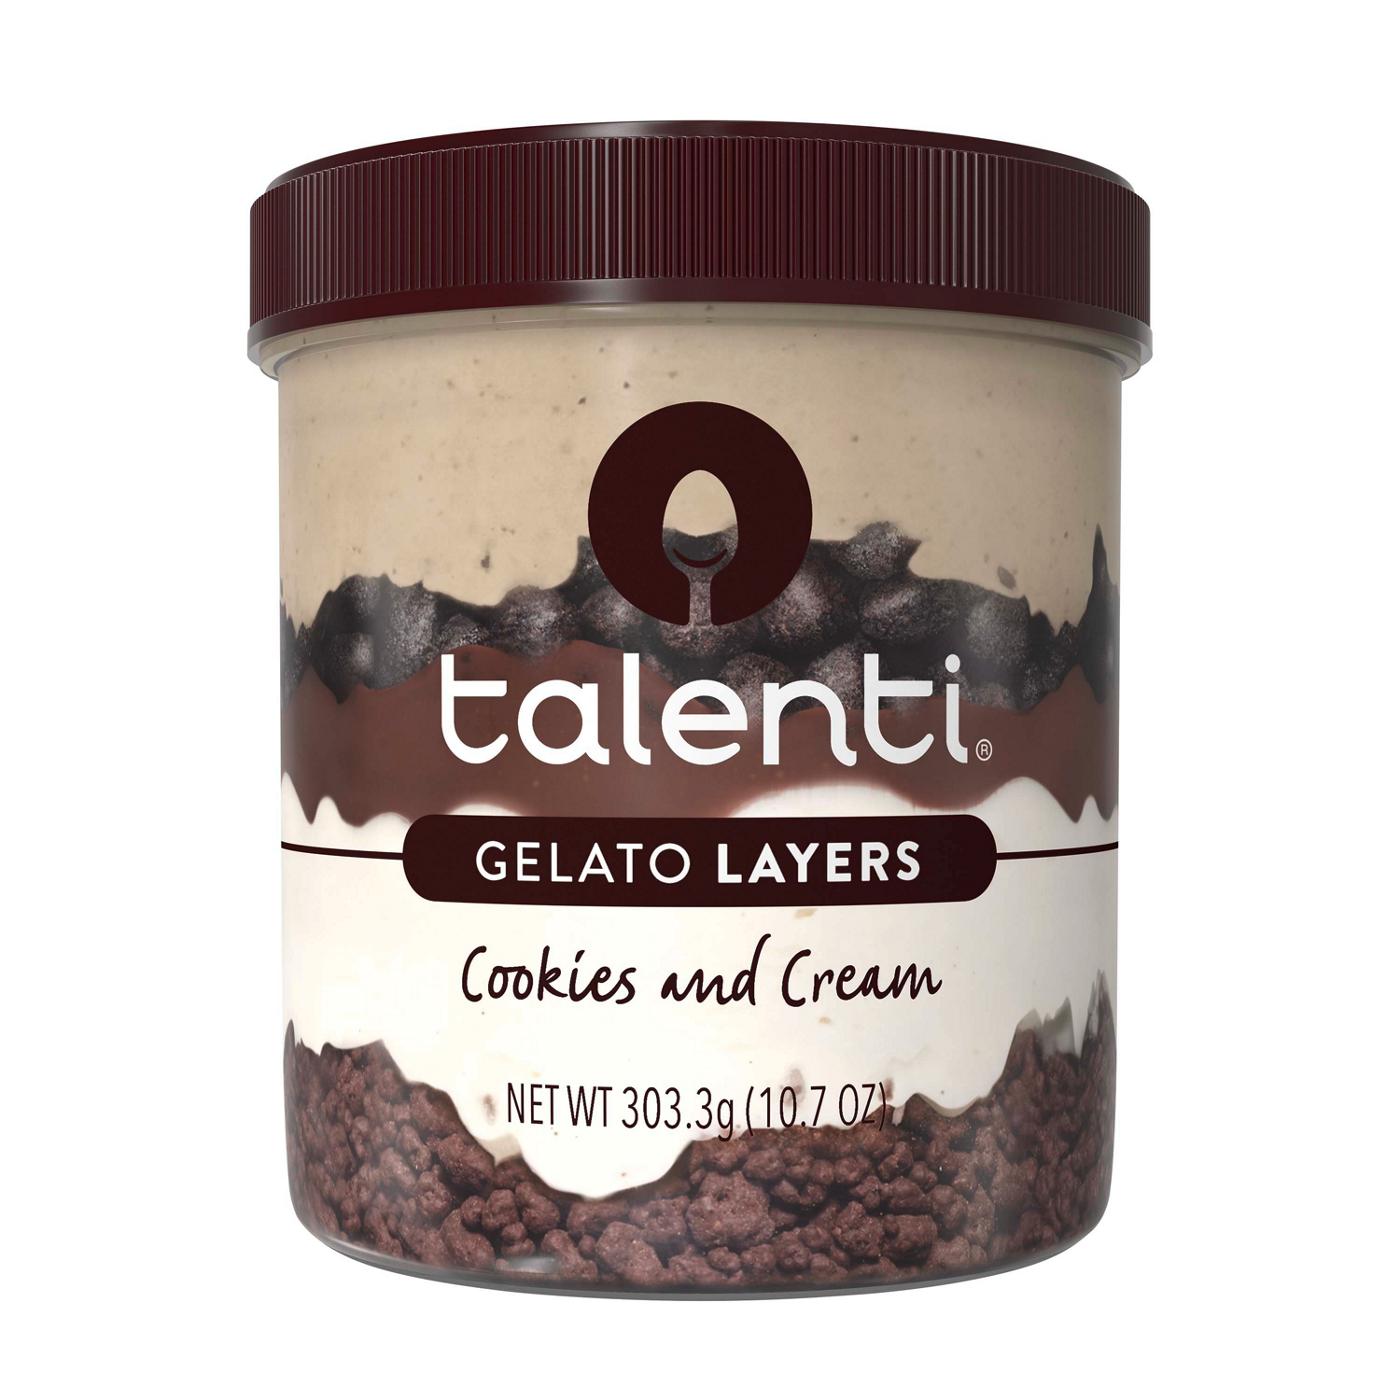 Talenti Gelato Layers Cookies and Cream; image 1 of 2